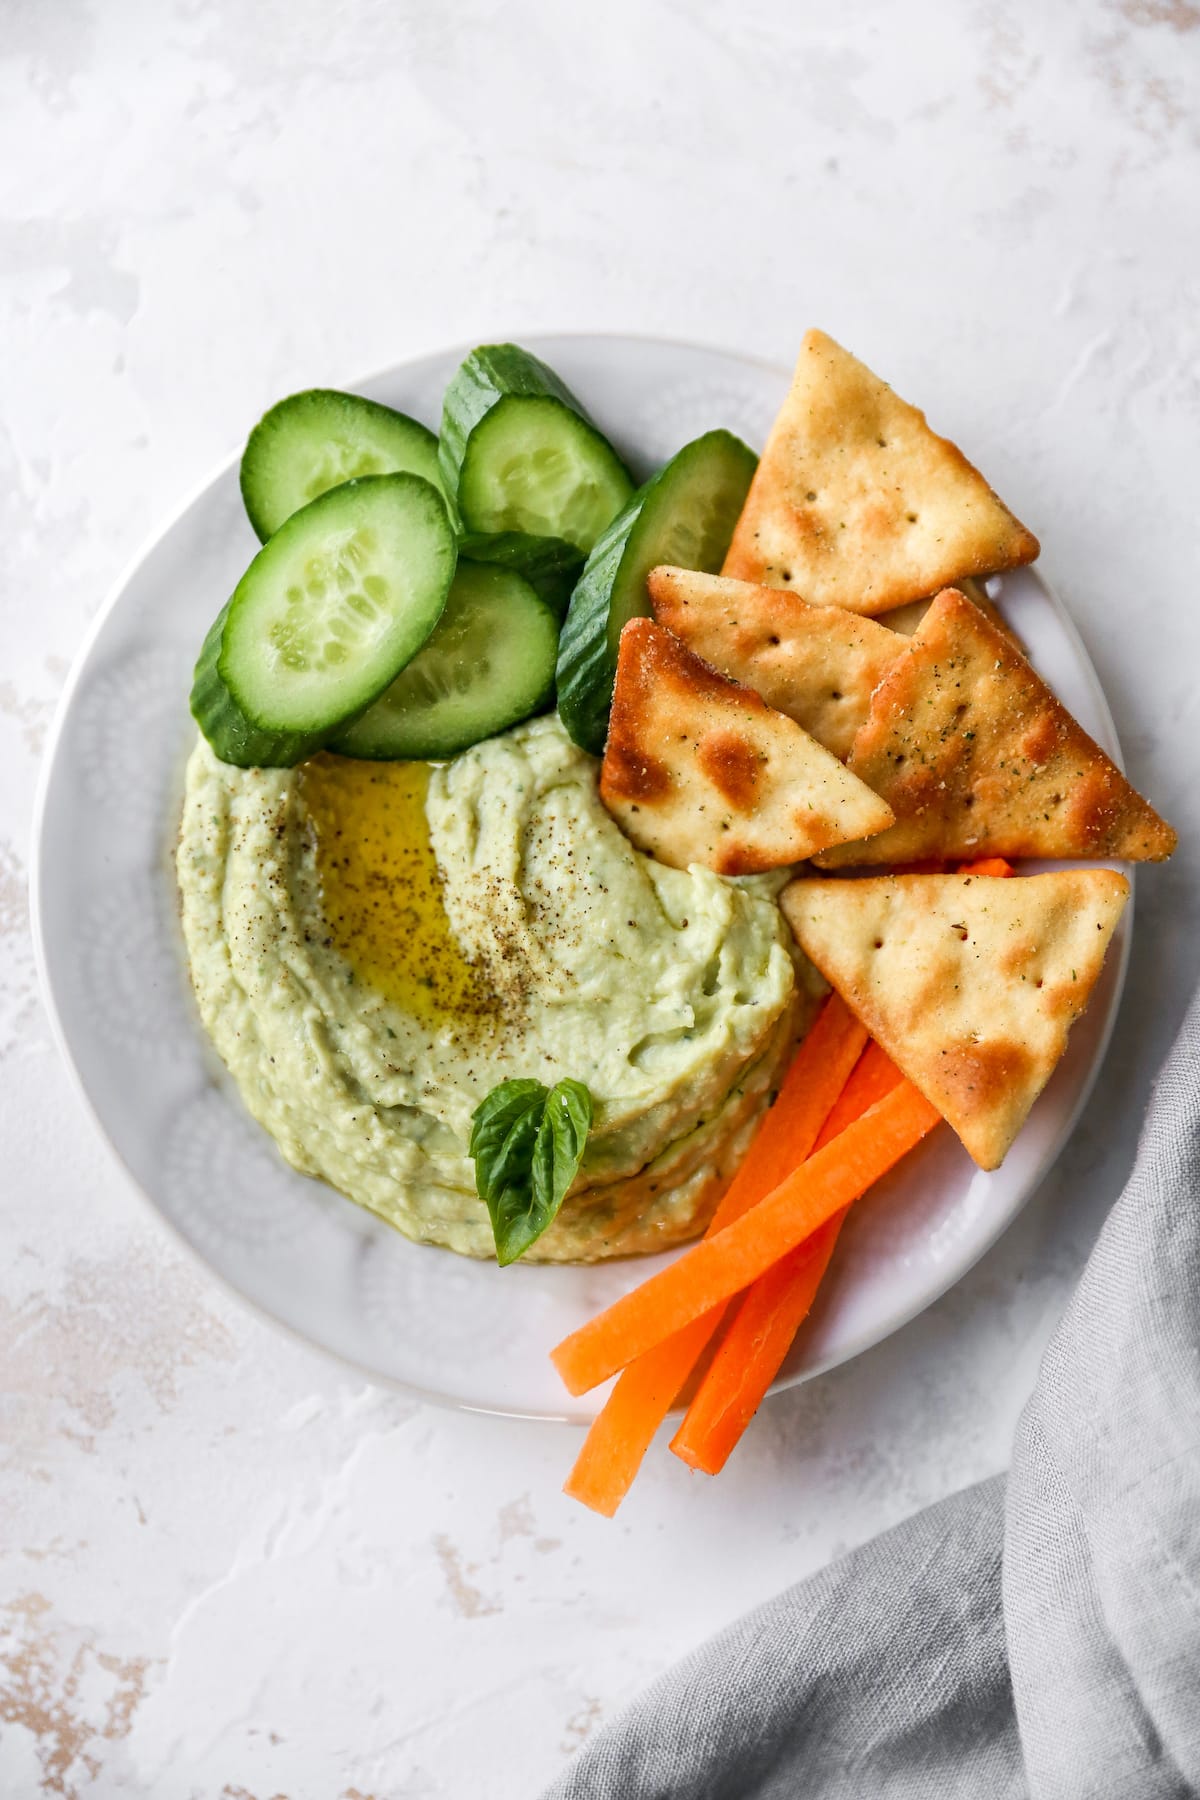 Bowl of lima bean hummus garnished with olive oil, pepper and basil and served with cucumbers, carrots and crackers.